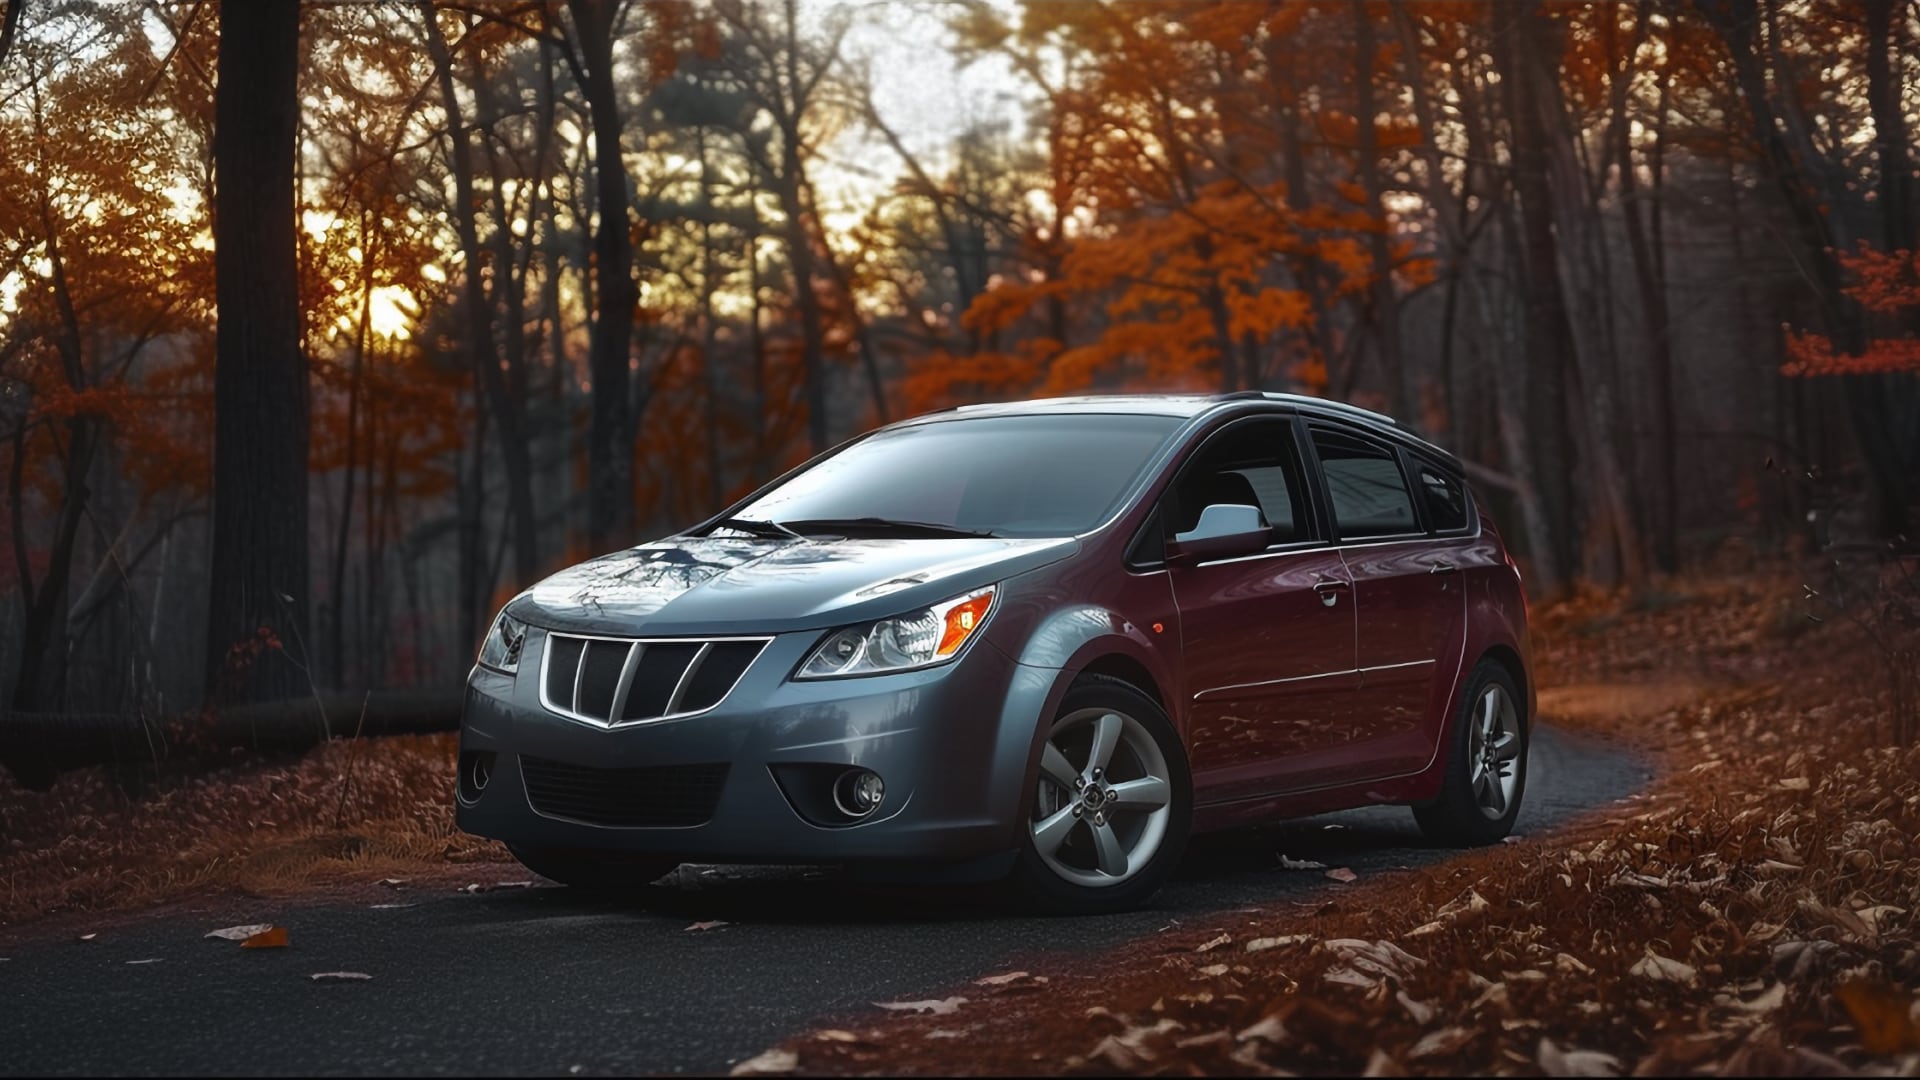 A silver Pontiac Vibe is driving down a road in the fall.